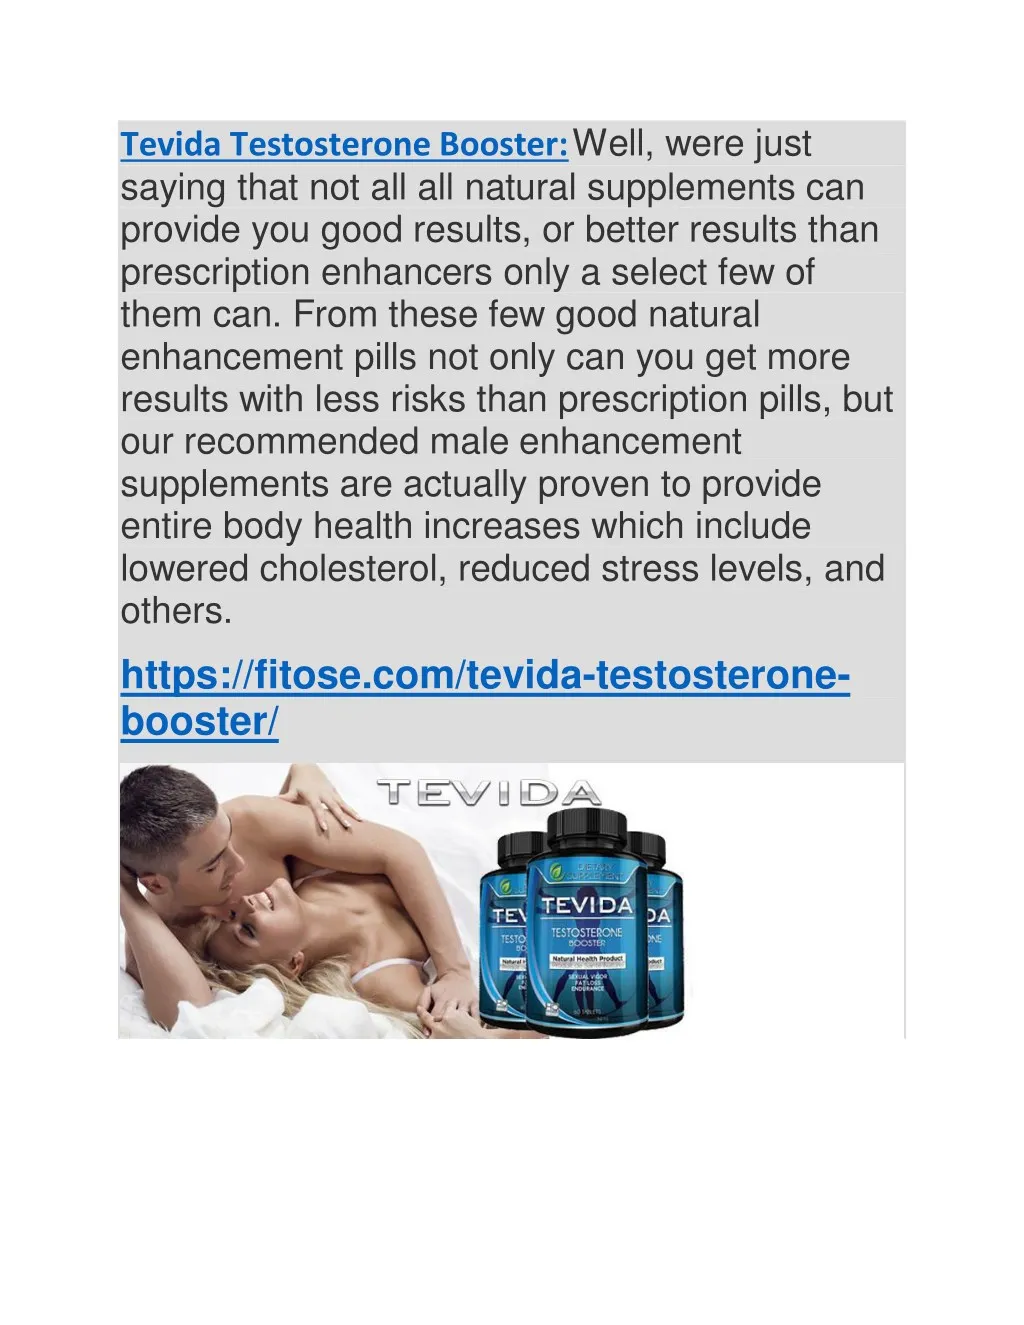 tevida testosterone booster well were just saying